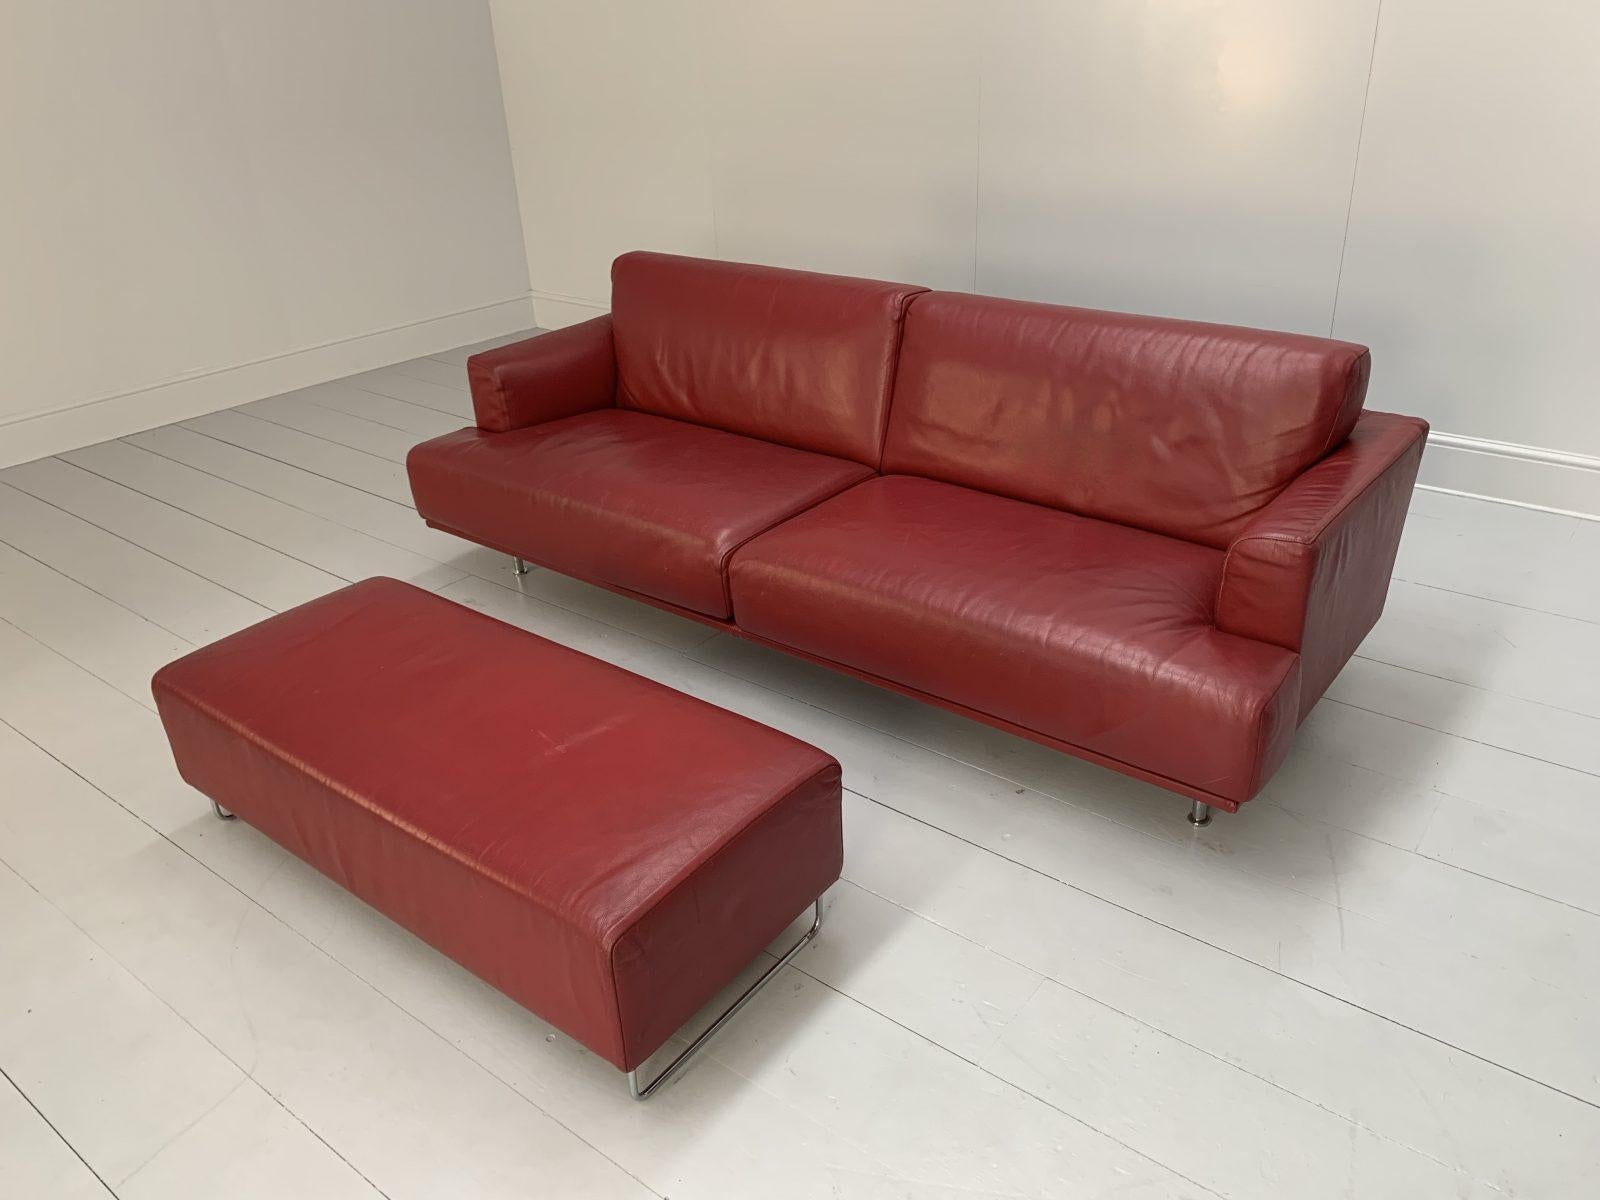 Cassina “253 Nest” 2.5-Seat Sofa & Bench Footstool – In Red “Pelle” Leather 1